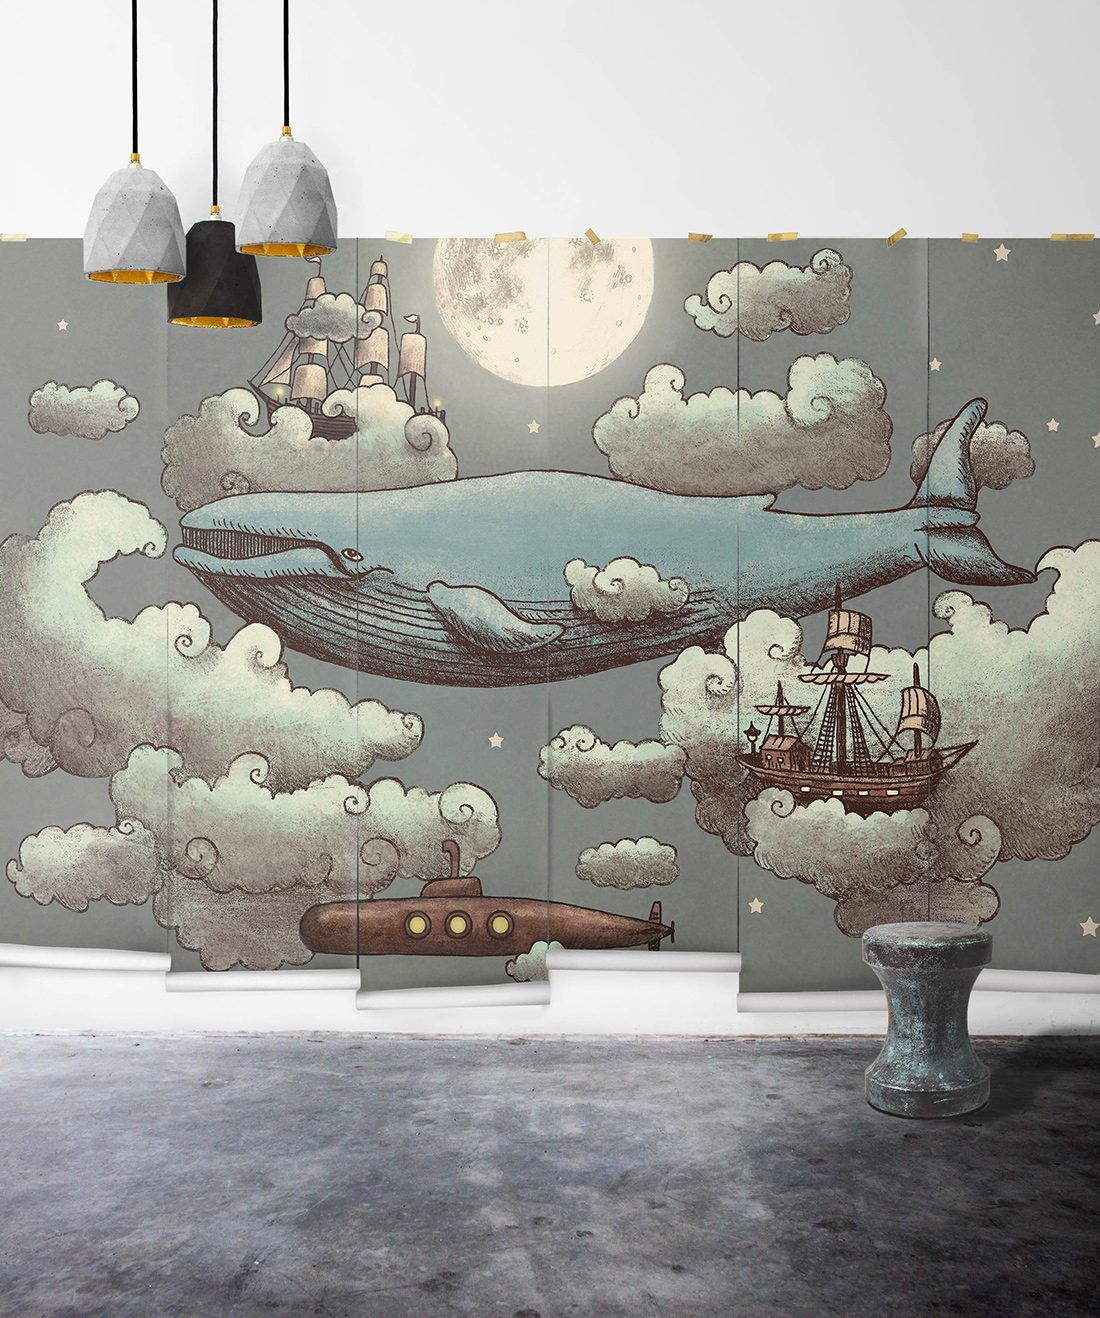 OCean Meets Sky is a fanciful wall mural